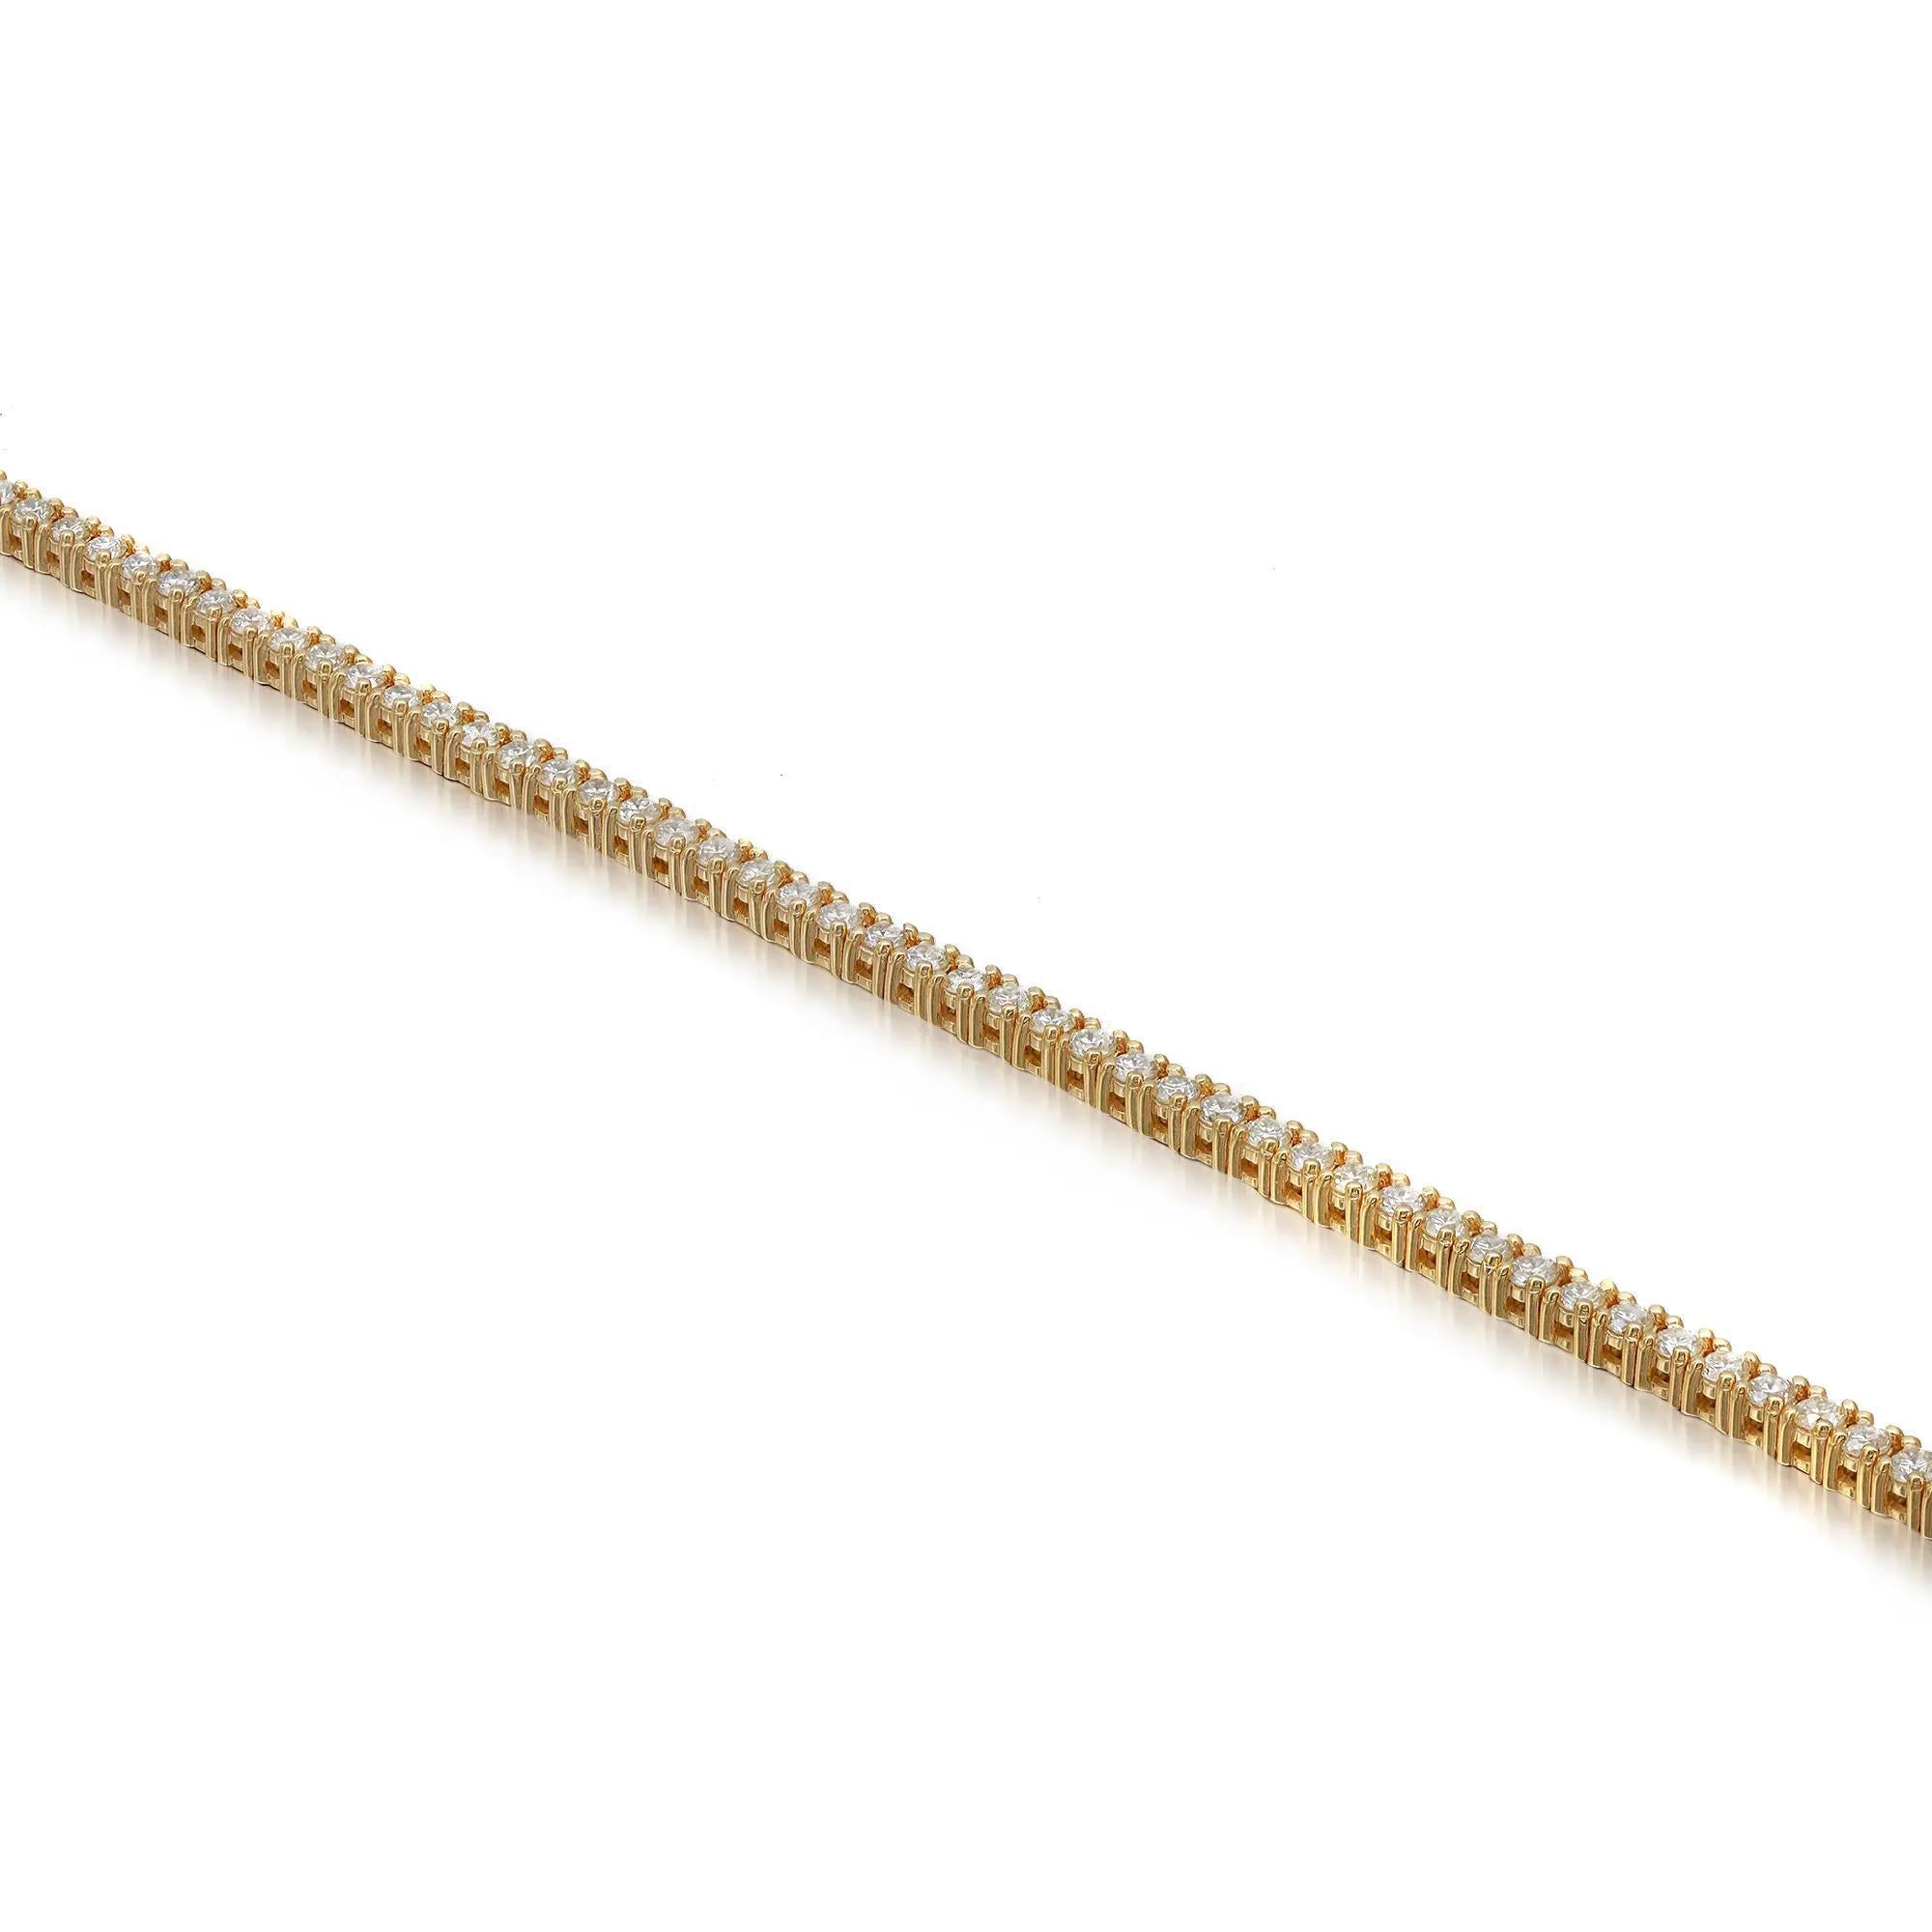 Prong Set Round Diamond Tennis Bracelet 14K Yellow Gold 0.95Cttw 7 Inches In New Condition For Sale In New York, NY